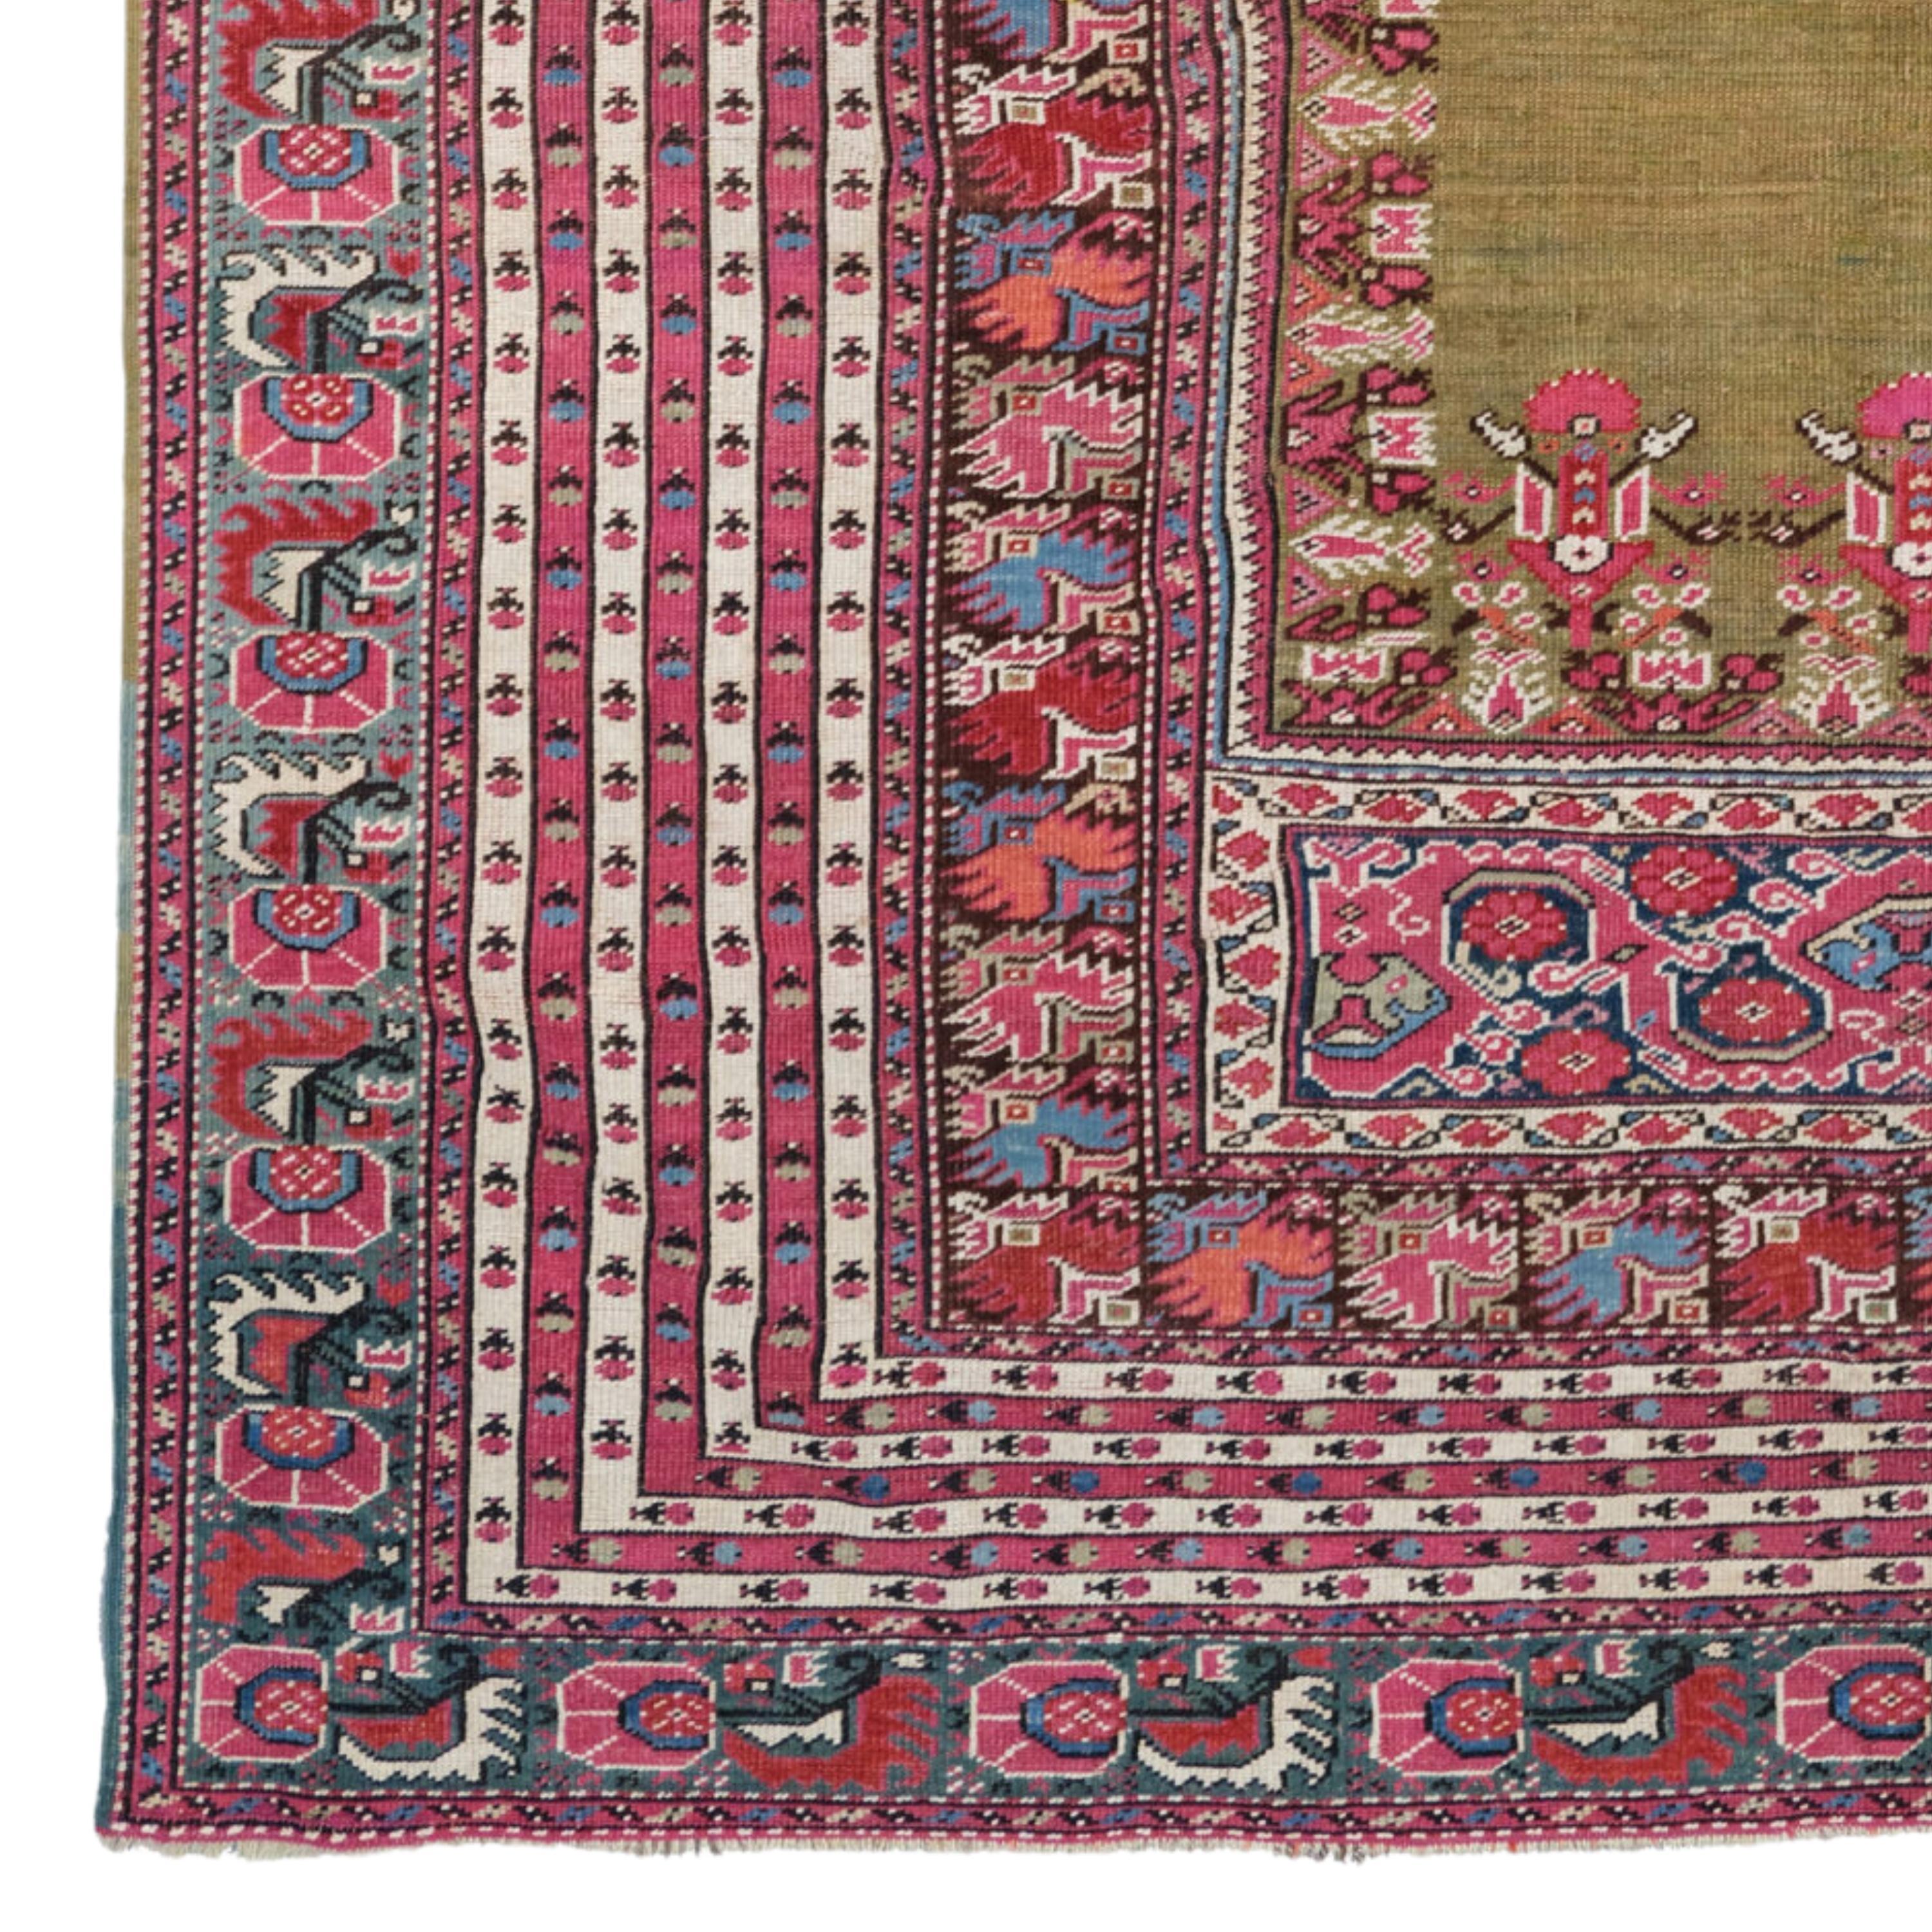 Antique Ghiordes Prayer Rug  Anatolian Rugs
Antique Ghiordes Prayer Rug Circa 1840’s
Size : 155×215 cm (61x84,6 In)

The rug is beautifully drawn with superb pastel colours through out especially the soft green in the field. The multiple stripe